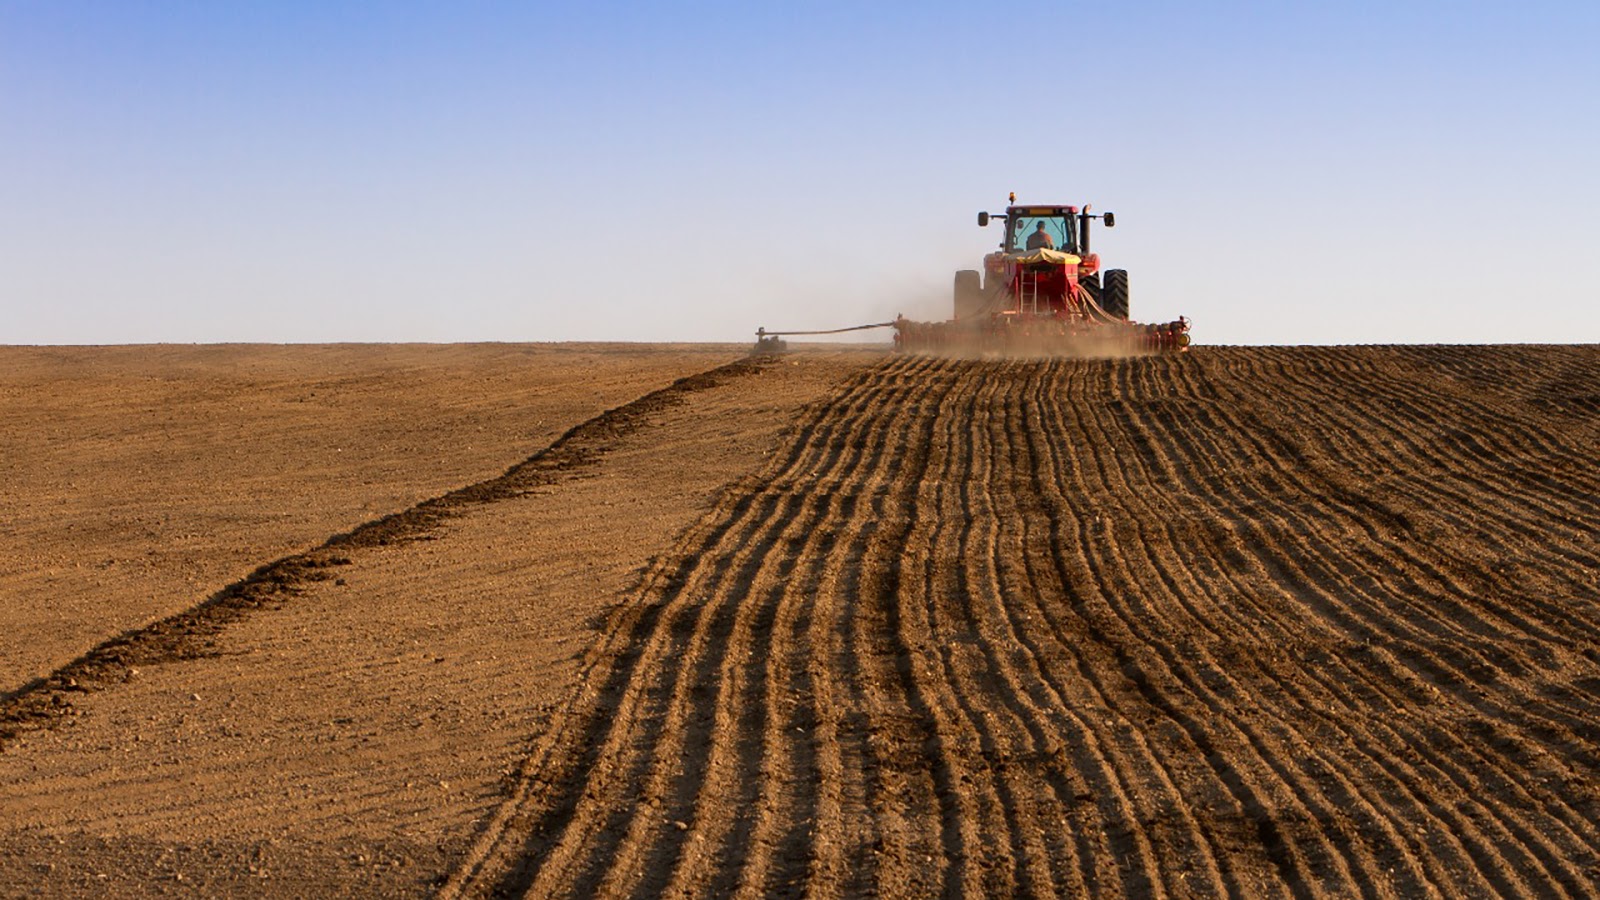 Kazakhstan Seeks to Attract $9.5 Billion in Agriculture Investment By 2025  - The Astana Times